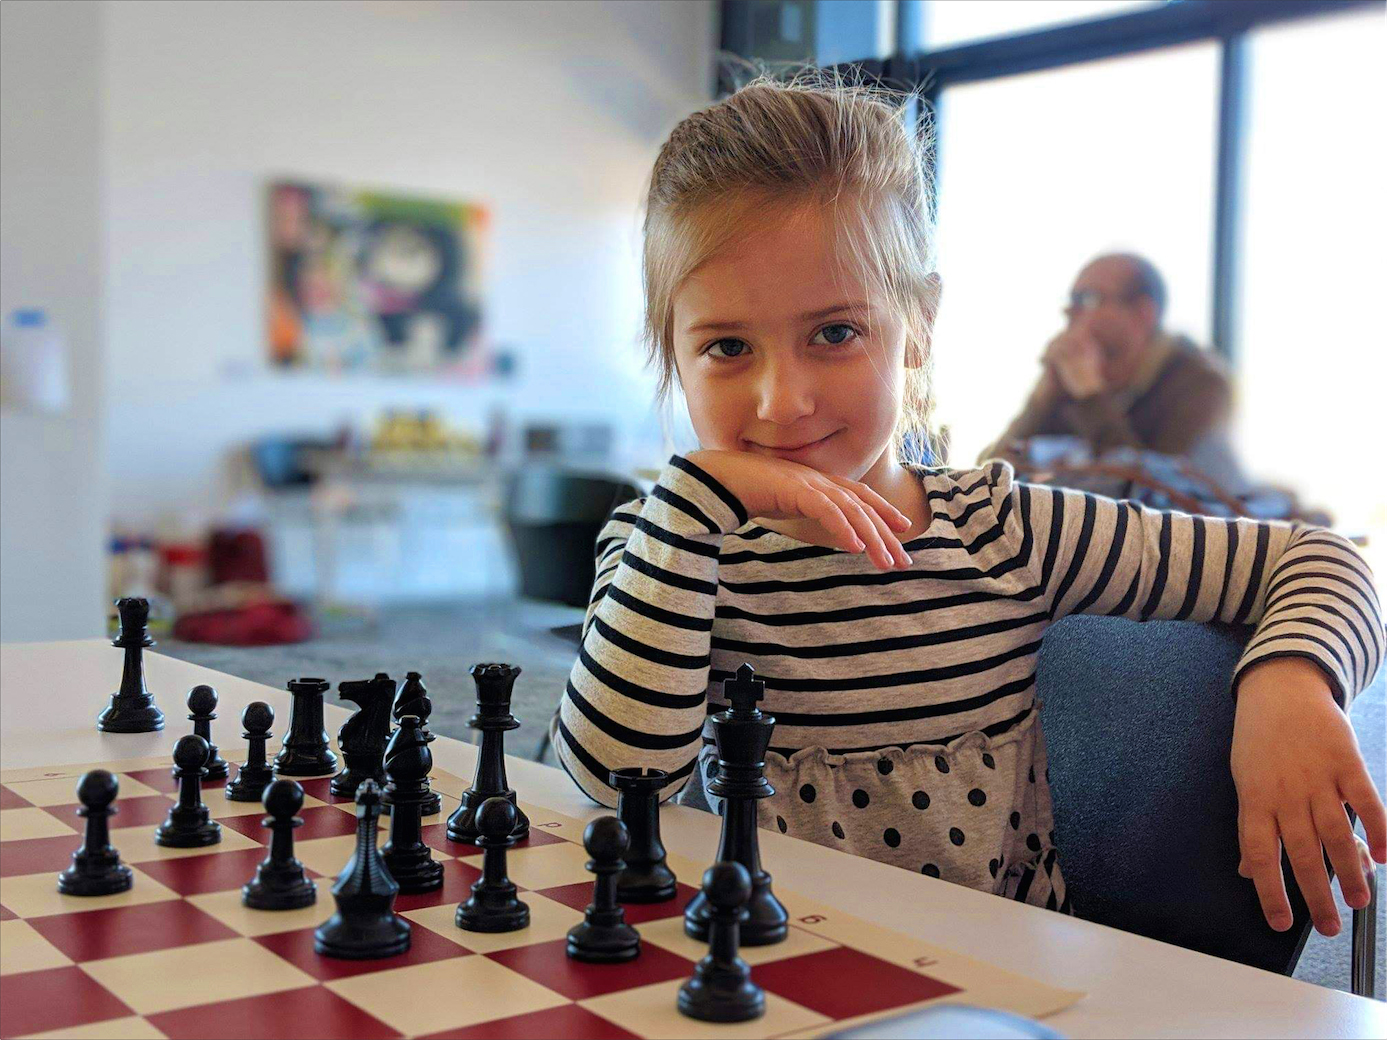 Charlie Jordan started playing chess at 3 years old and played her first championship at age 4. She was preschool state champion, kindergarten state champion, and at age 5 competed in the Midlands Girls’ Tournament in 2019, where she took third place. She loves chess because she wins! 